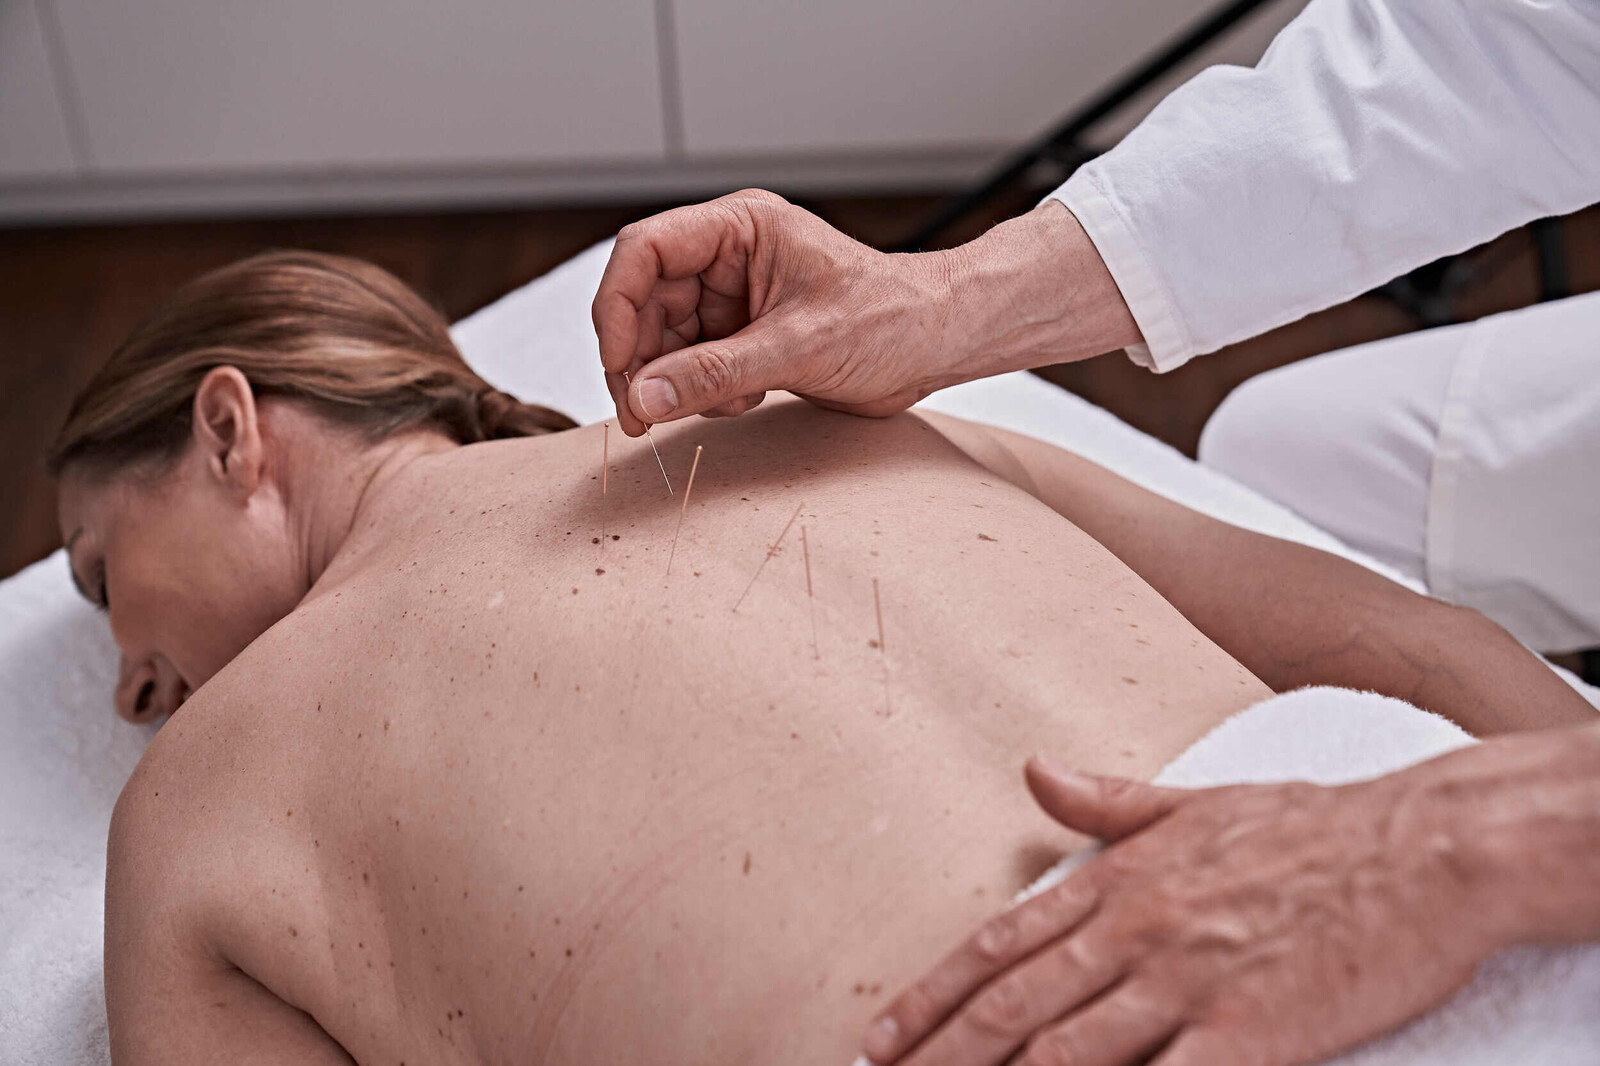 A, Traditional acupuncture: manual manipulation of an inserted needle